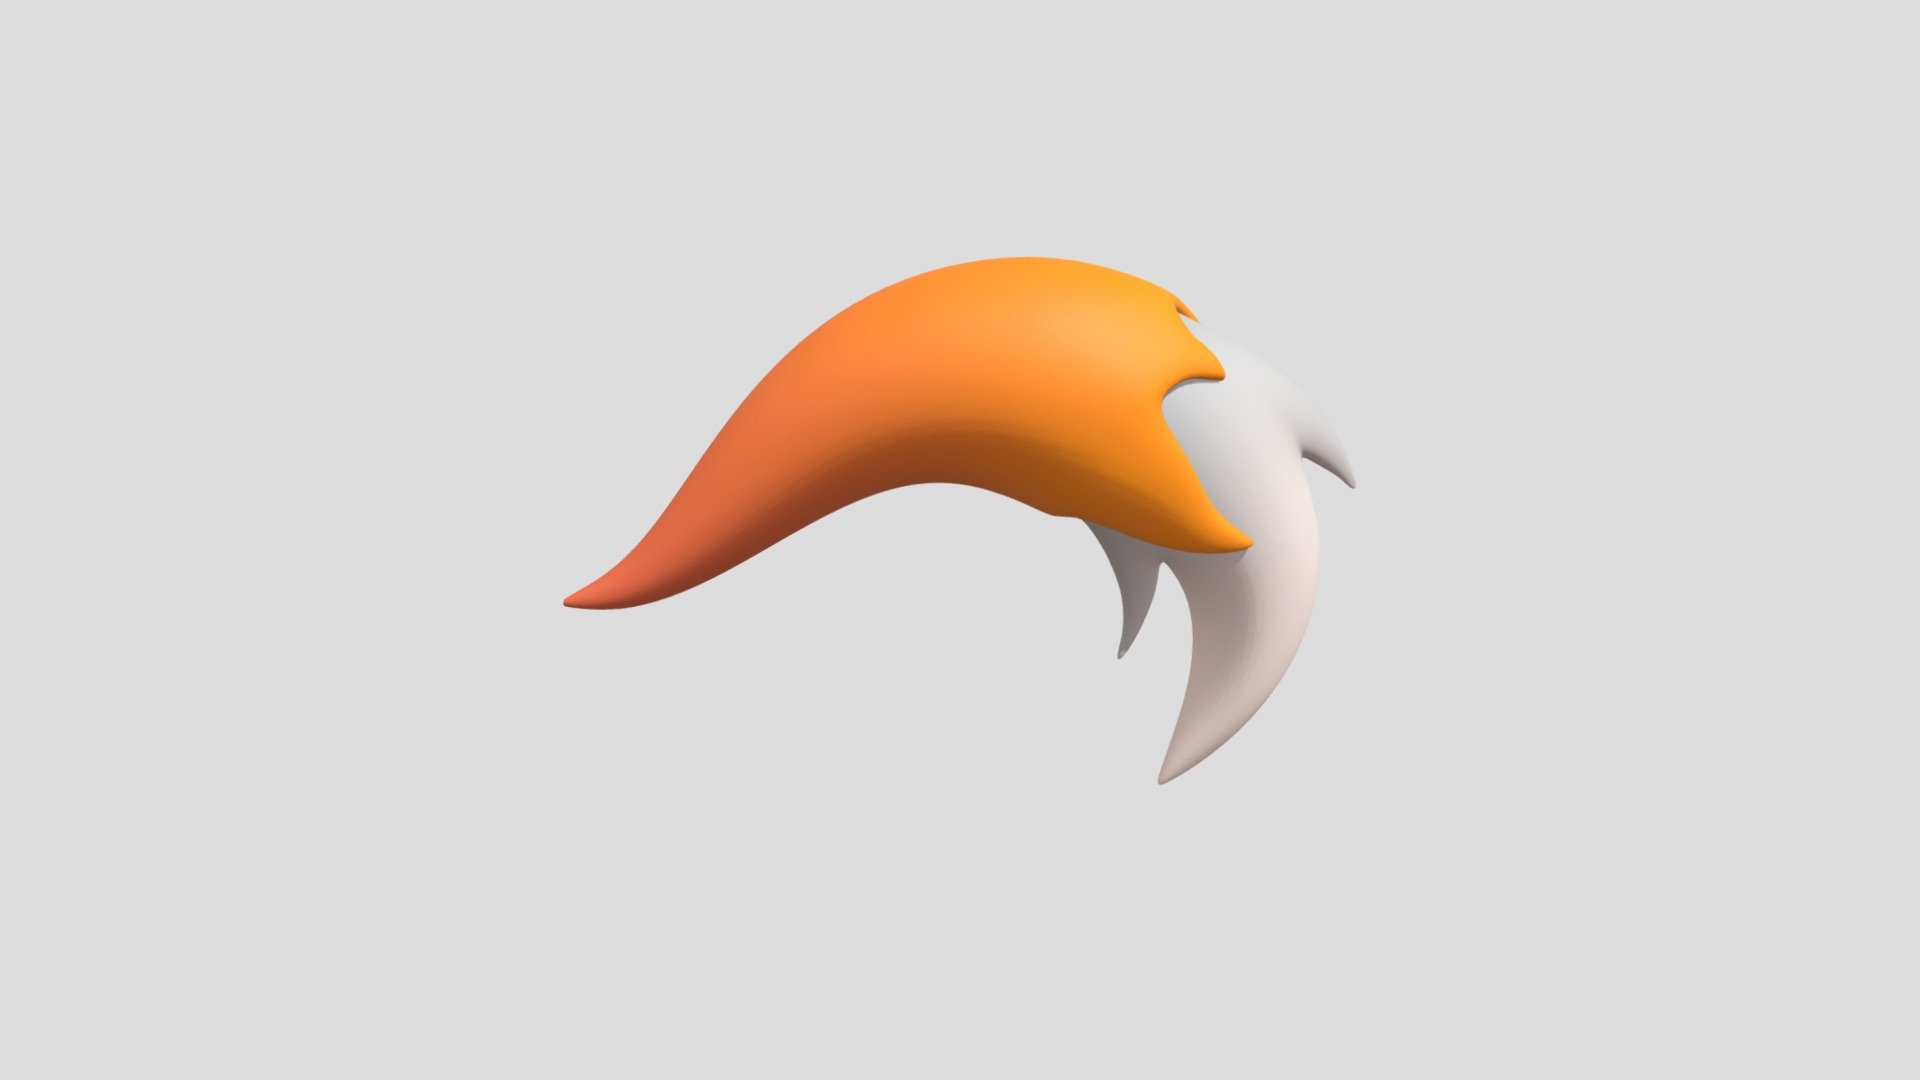 Textures: 1024 × 1024, Colors on texture: Red, white and orange colors.

Materials: 1 - Fox Tail

Smooth shaded.

Non-Mirrored.

Subdivision Level: 2

Rigged.

Origin located on Beginning-center.

Polygons: 15808

Vertices: 7954

Formats: Fbx, Obj, Stl, Dae.

I hope you enjoy the model! - Fox Tail - Buy Royalty Free 3D model by Ed+ (@EDplus) 3d model